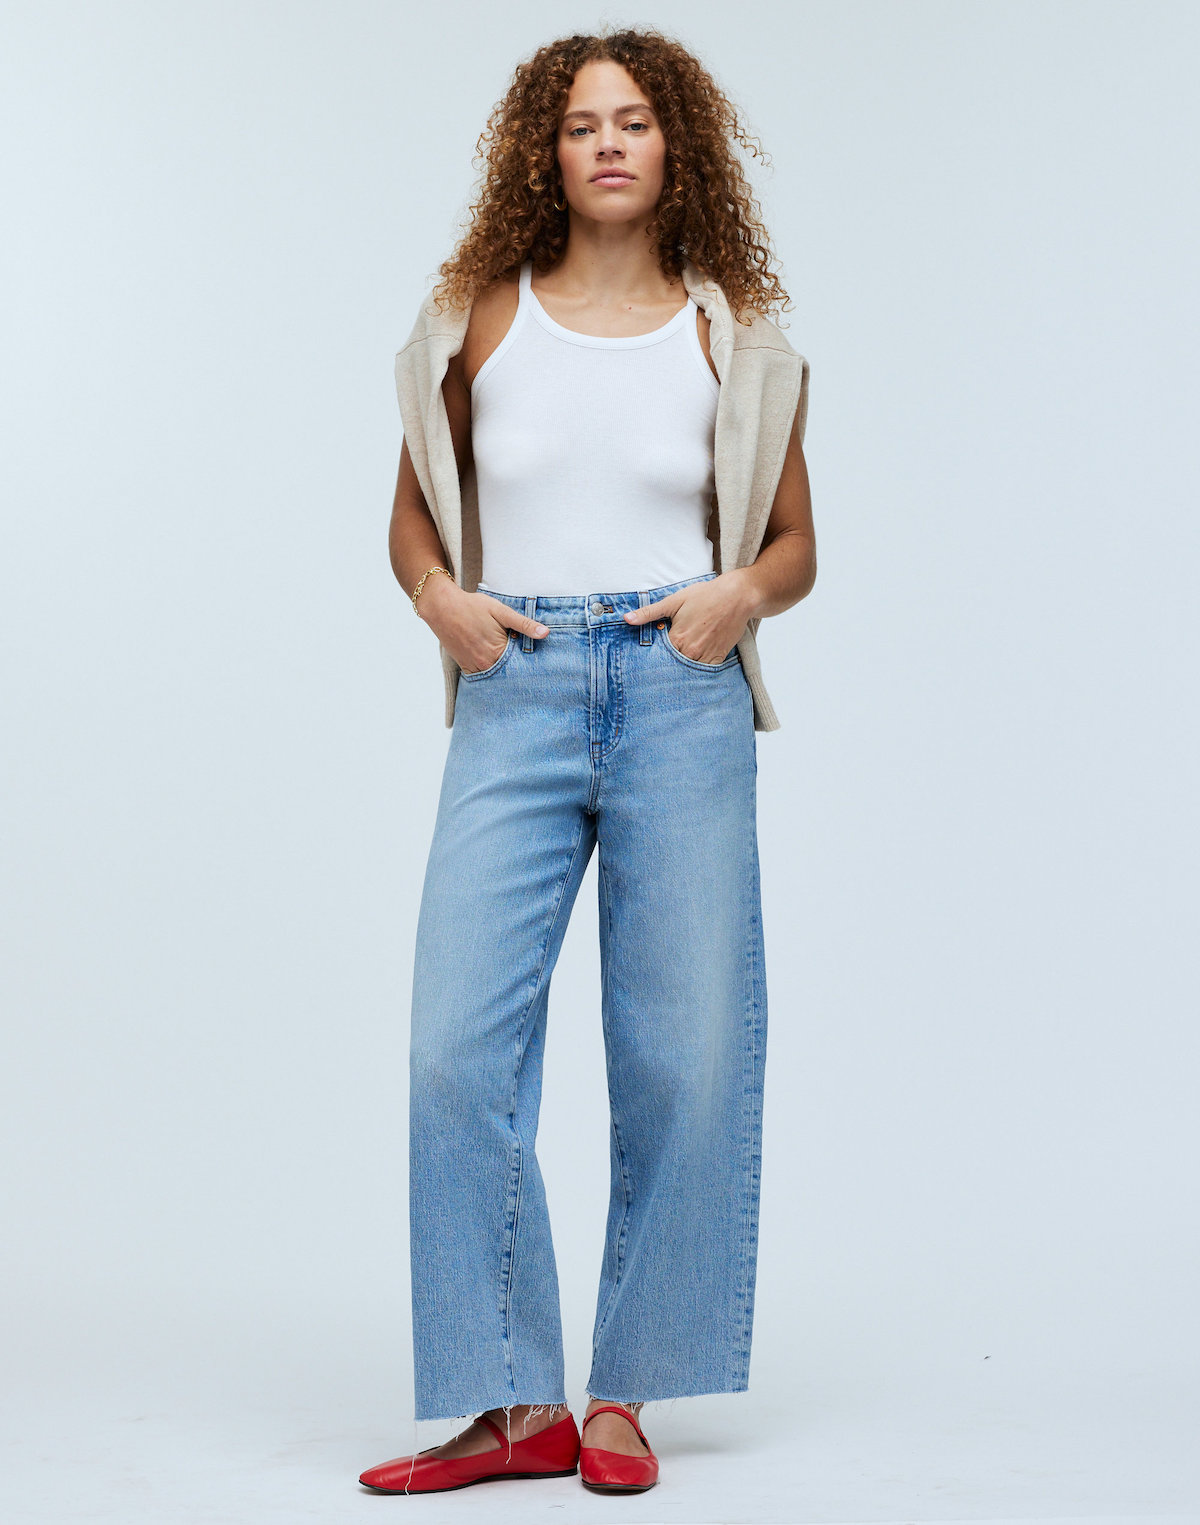 10 Best Places to Buy Jeans for Women, Stylists Say